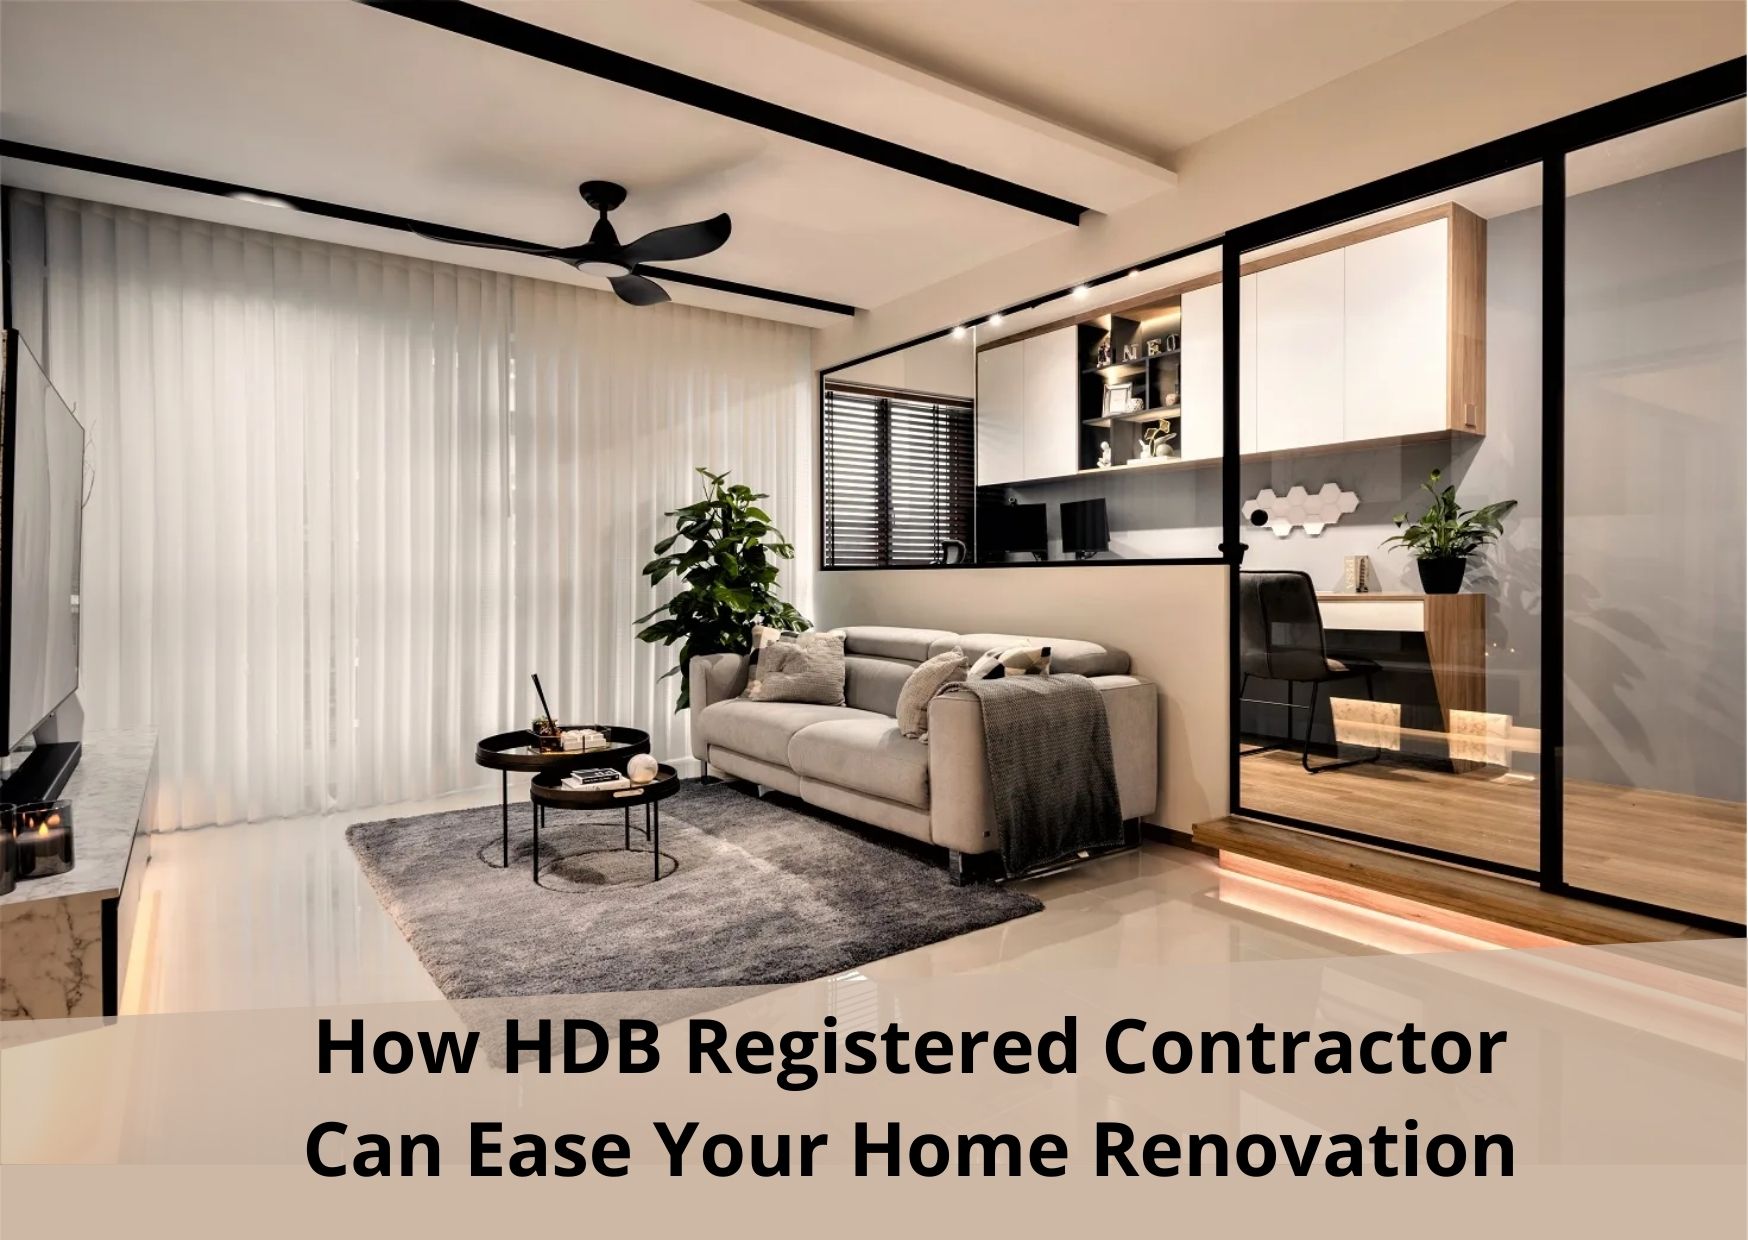 How HDB Registered Contractor Can Ease Your Home Renovation